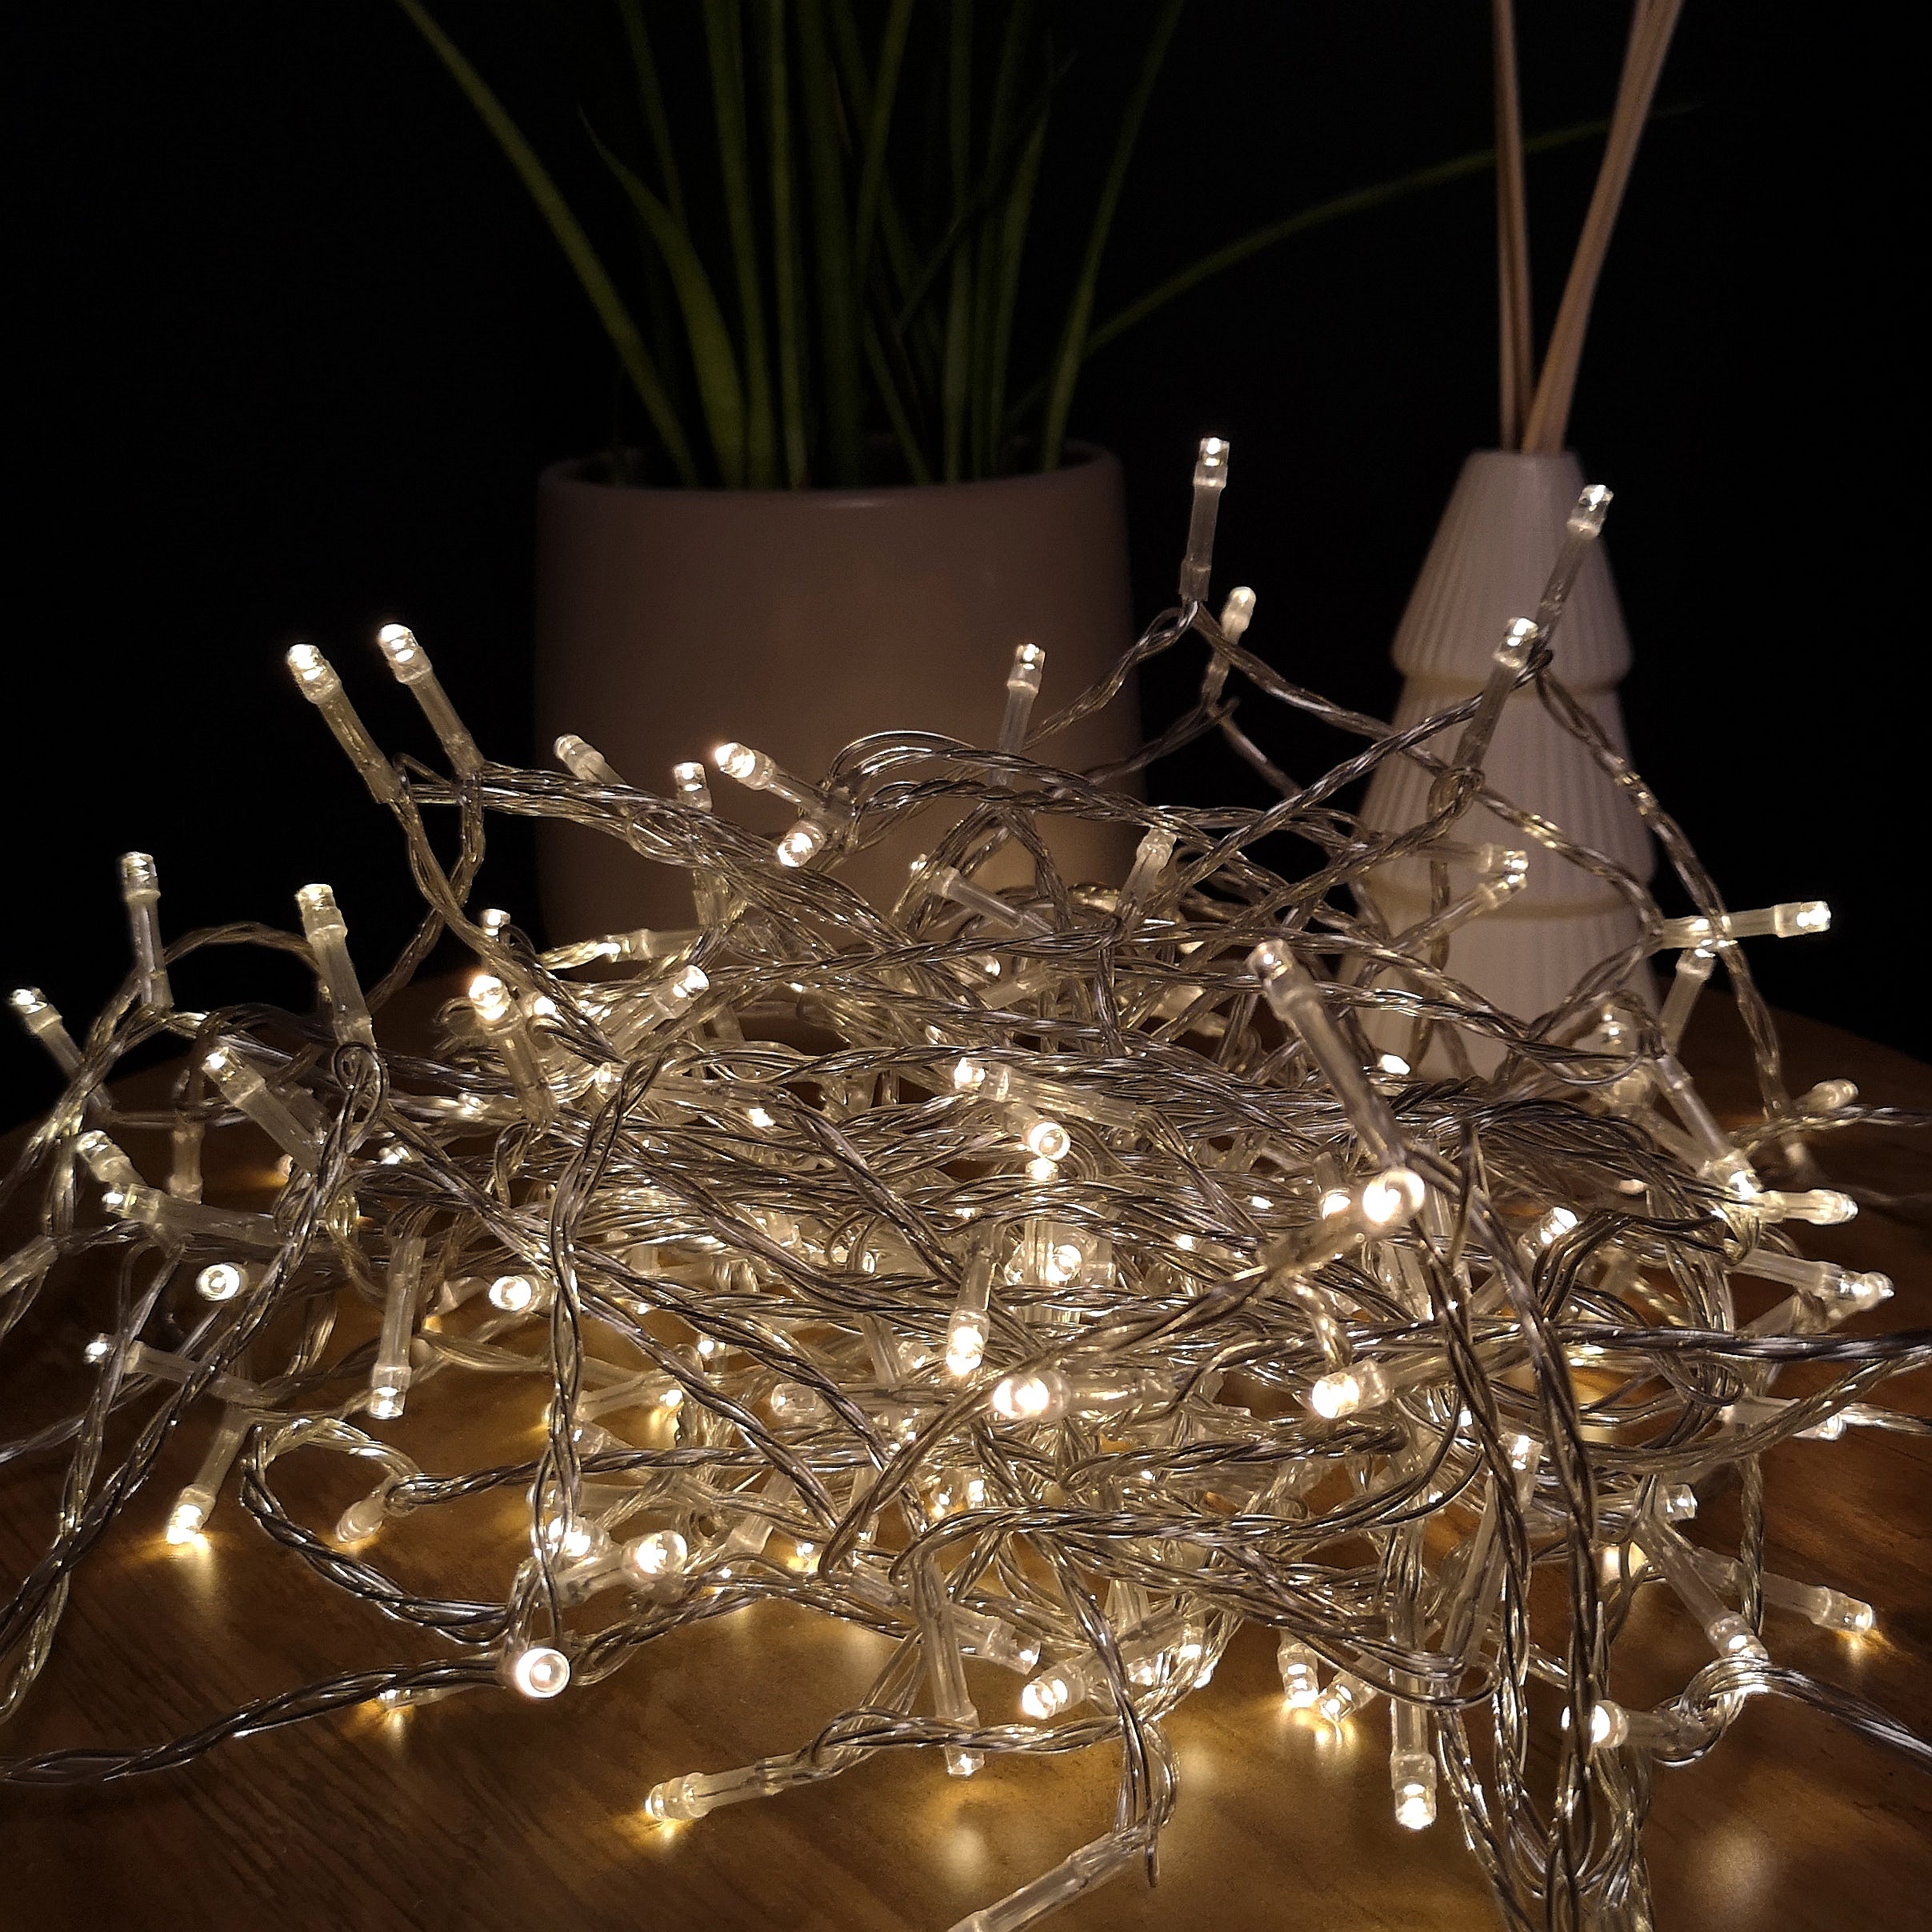 20m Battery Operated Indoor Outdoor Christmas String Lights with 200 LEDs in Warm White